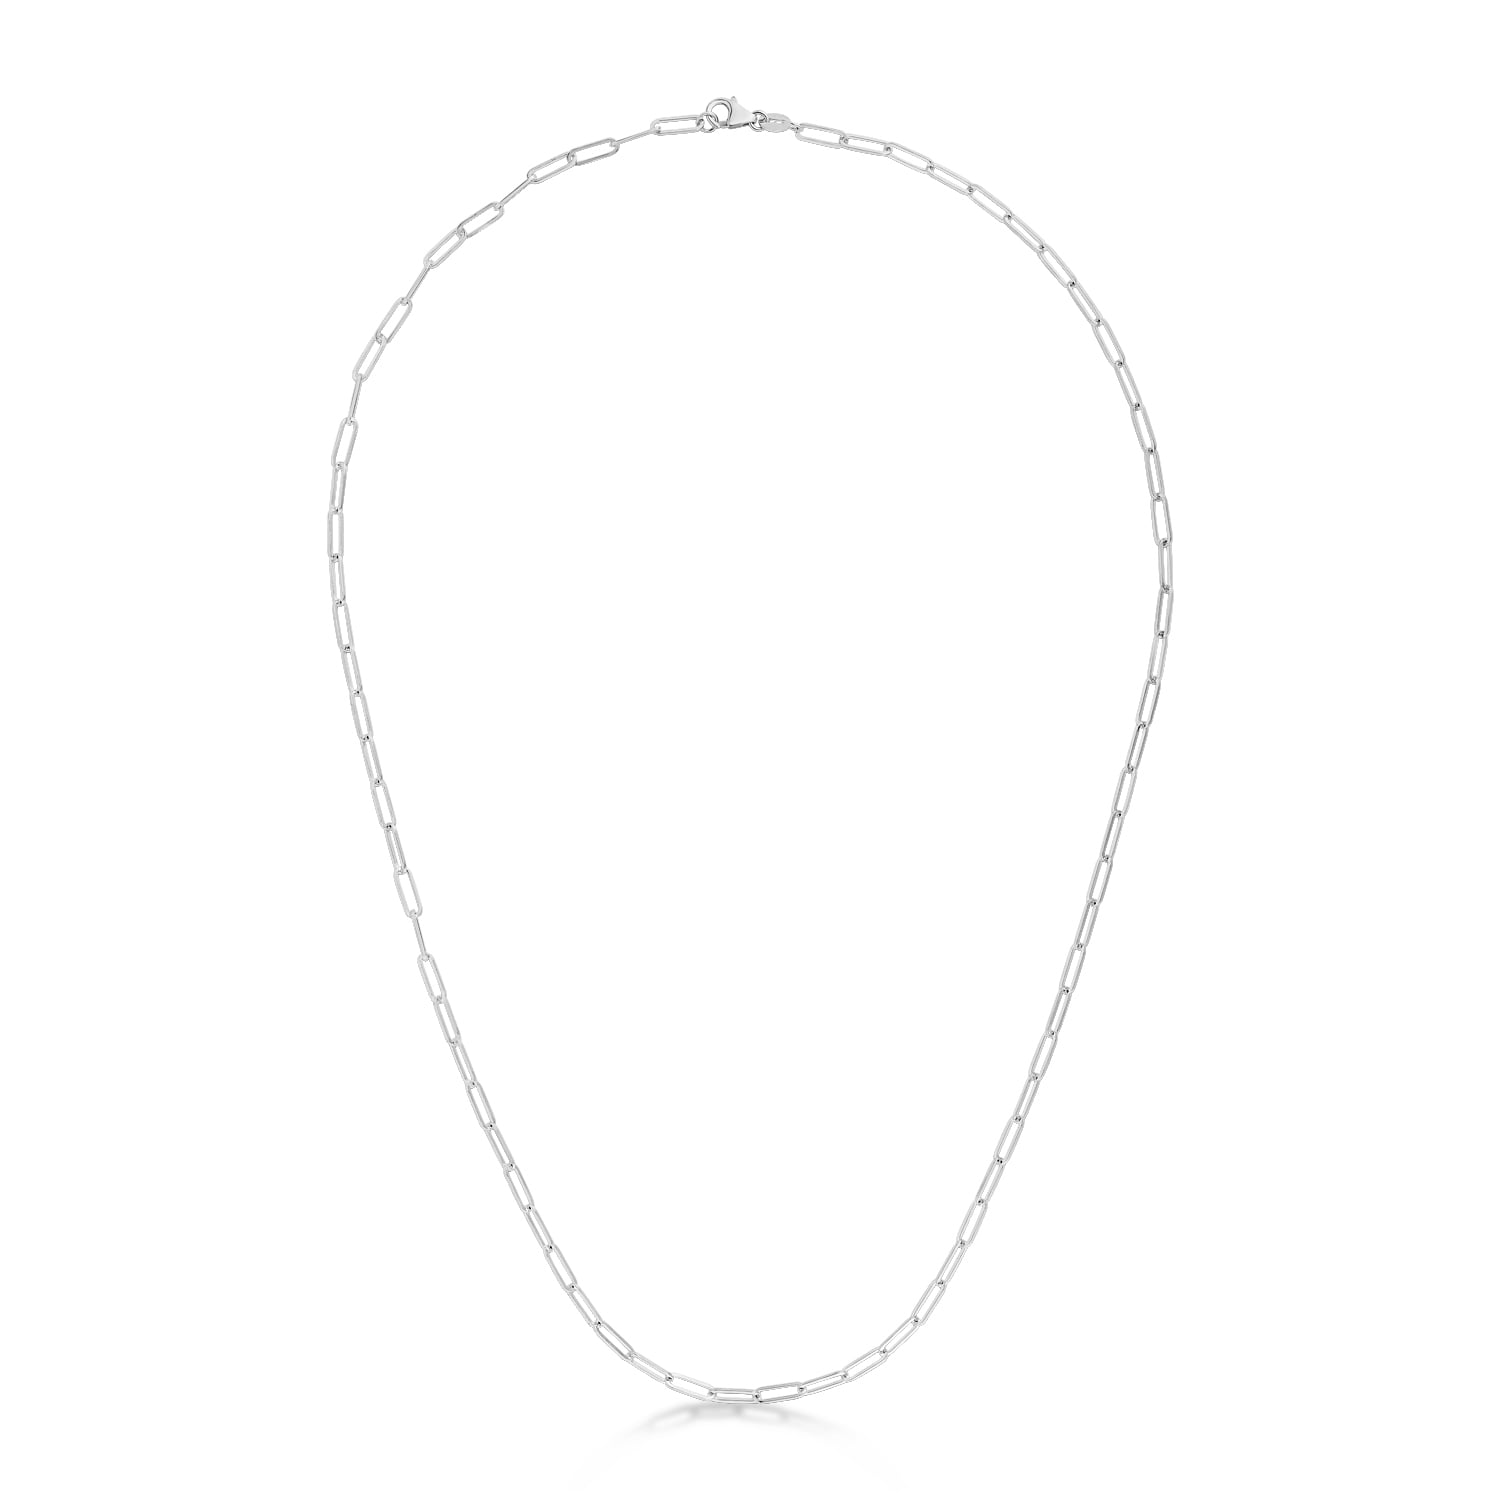 Small Paperclip Link Chain Necklace 14k White Gold (2.1mm)